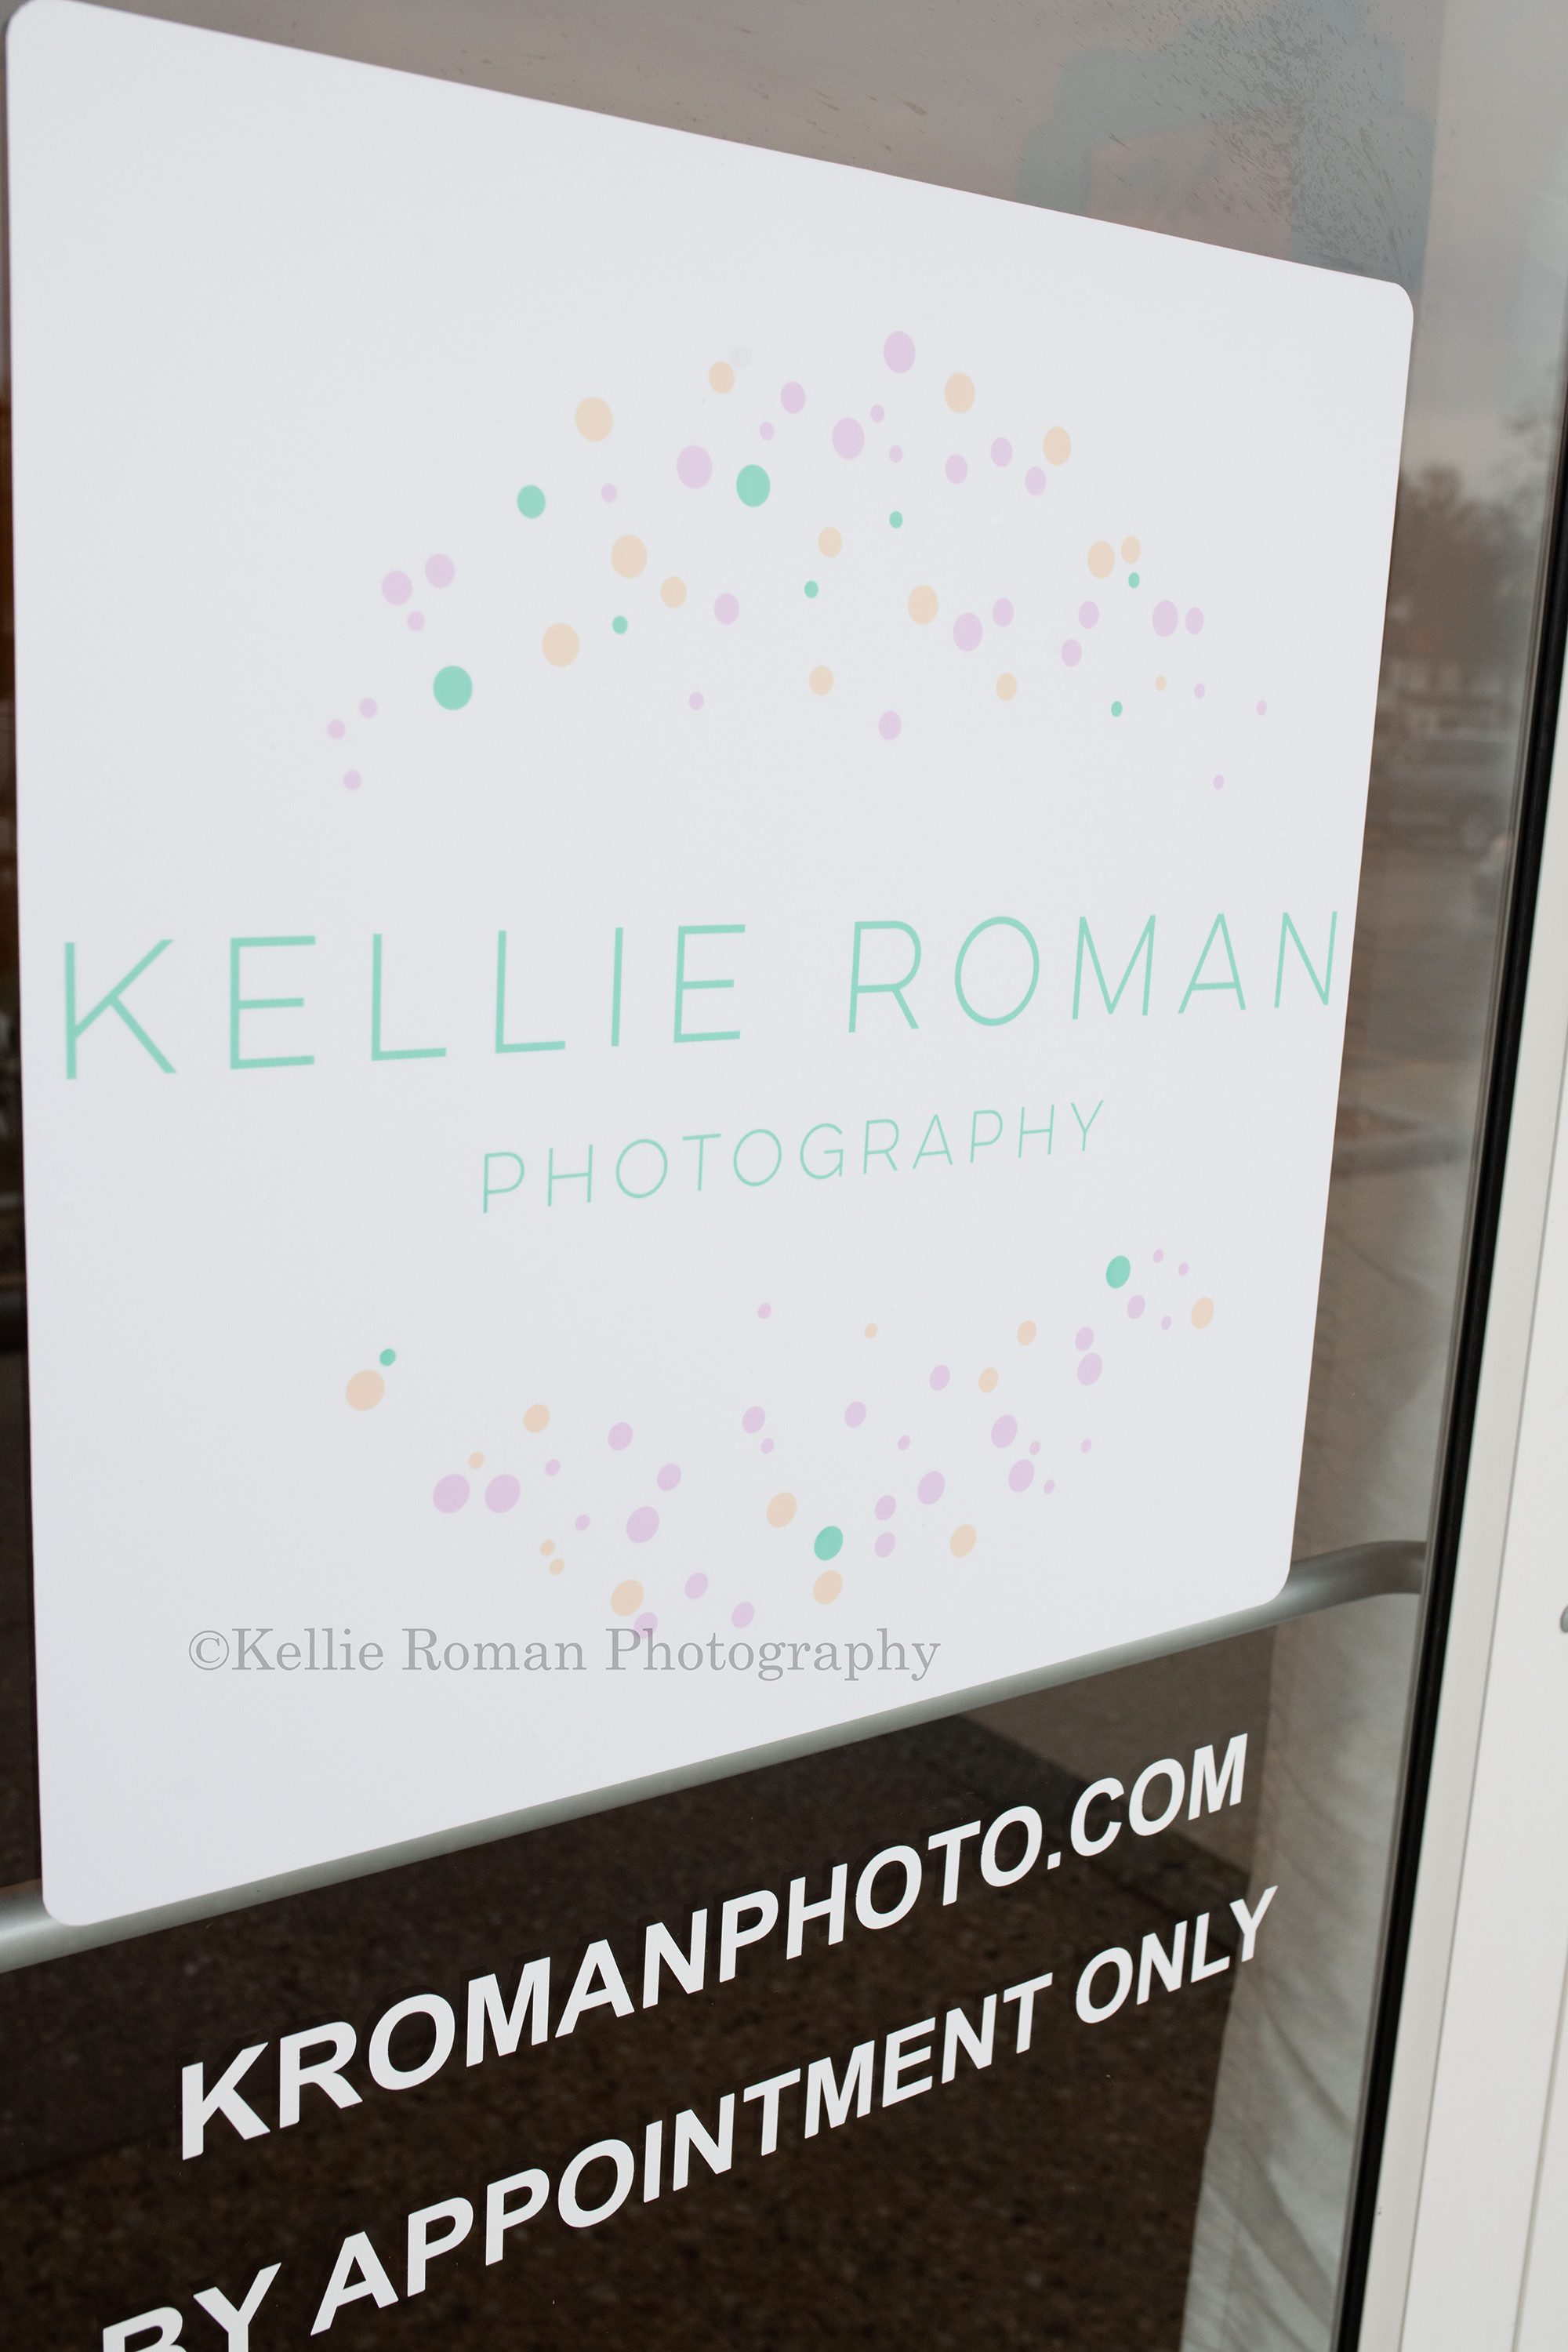 greendale village studio a close up image of a photographers store front located in the historic downtown greendale village the image is of the photographers logo and website